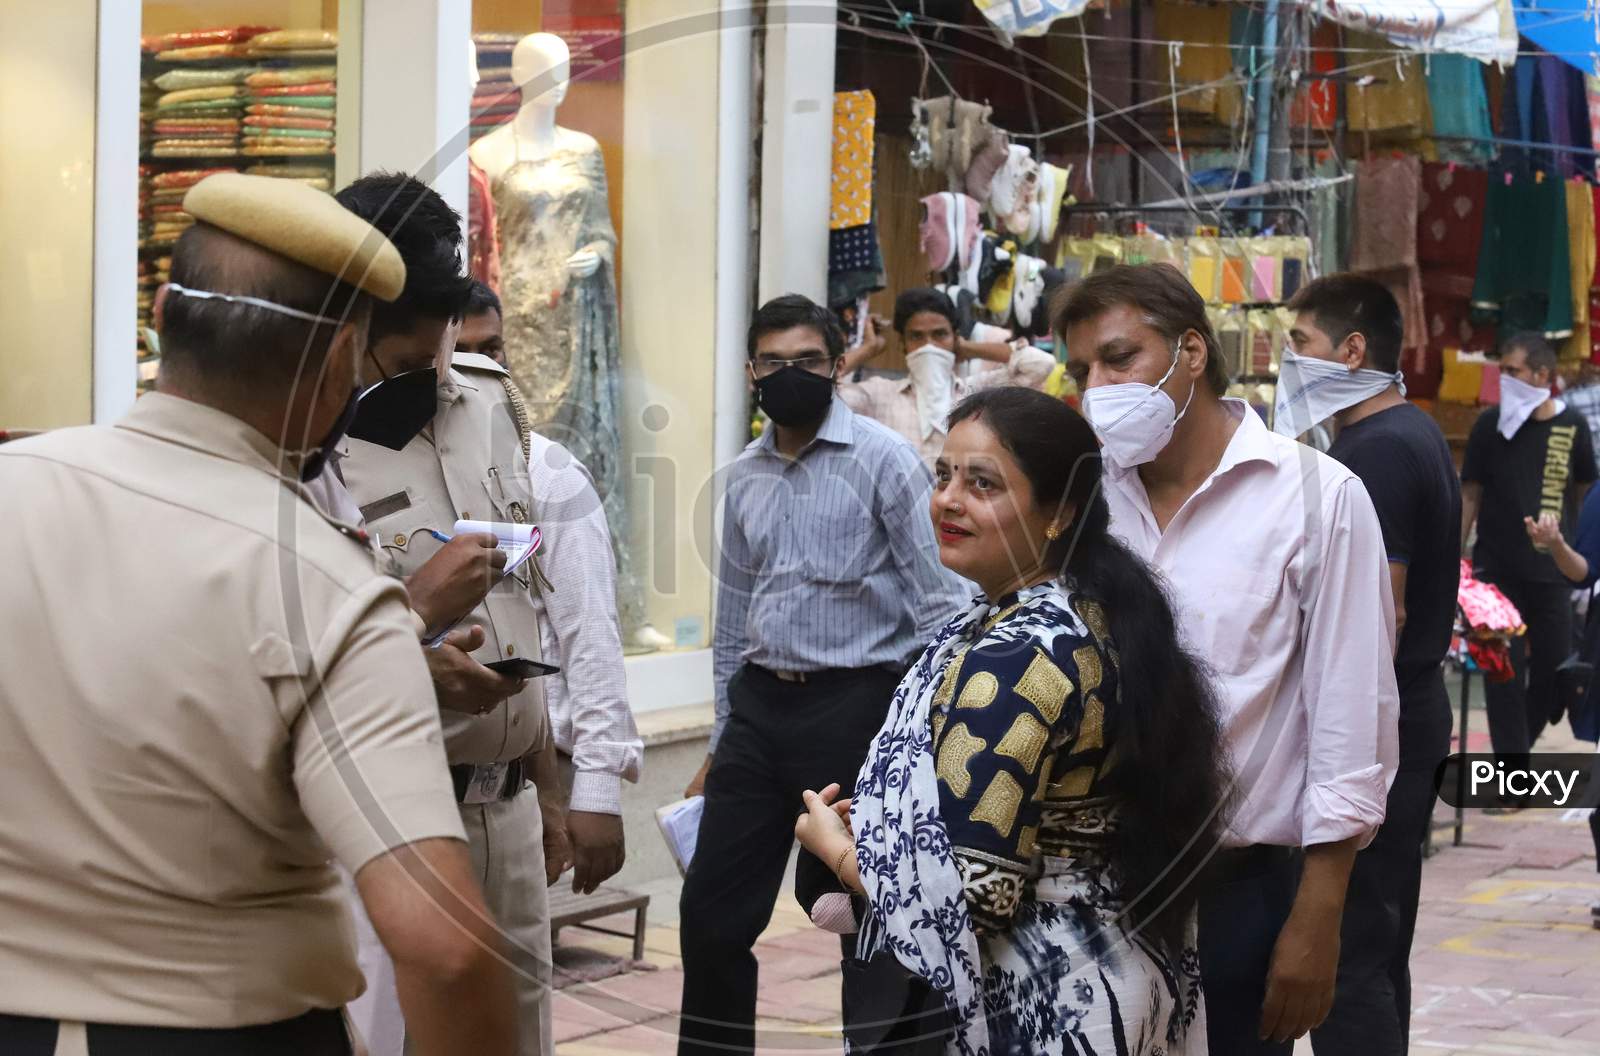 Delhi Police fine people for violating the measures for not wearing face masks, at Lajpat Nagar market, On June 20, 2020 In New Delhi, India.